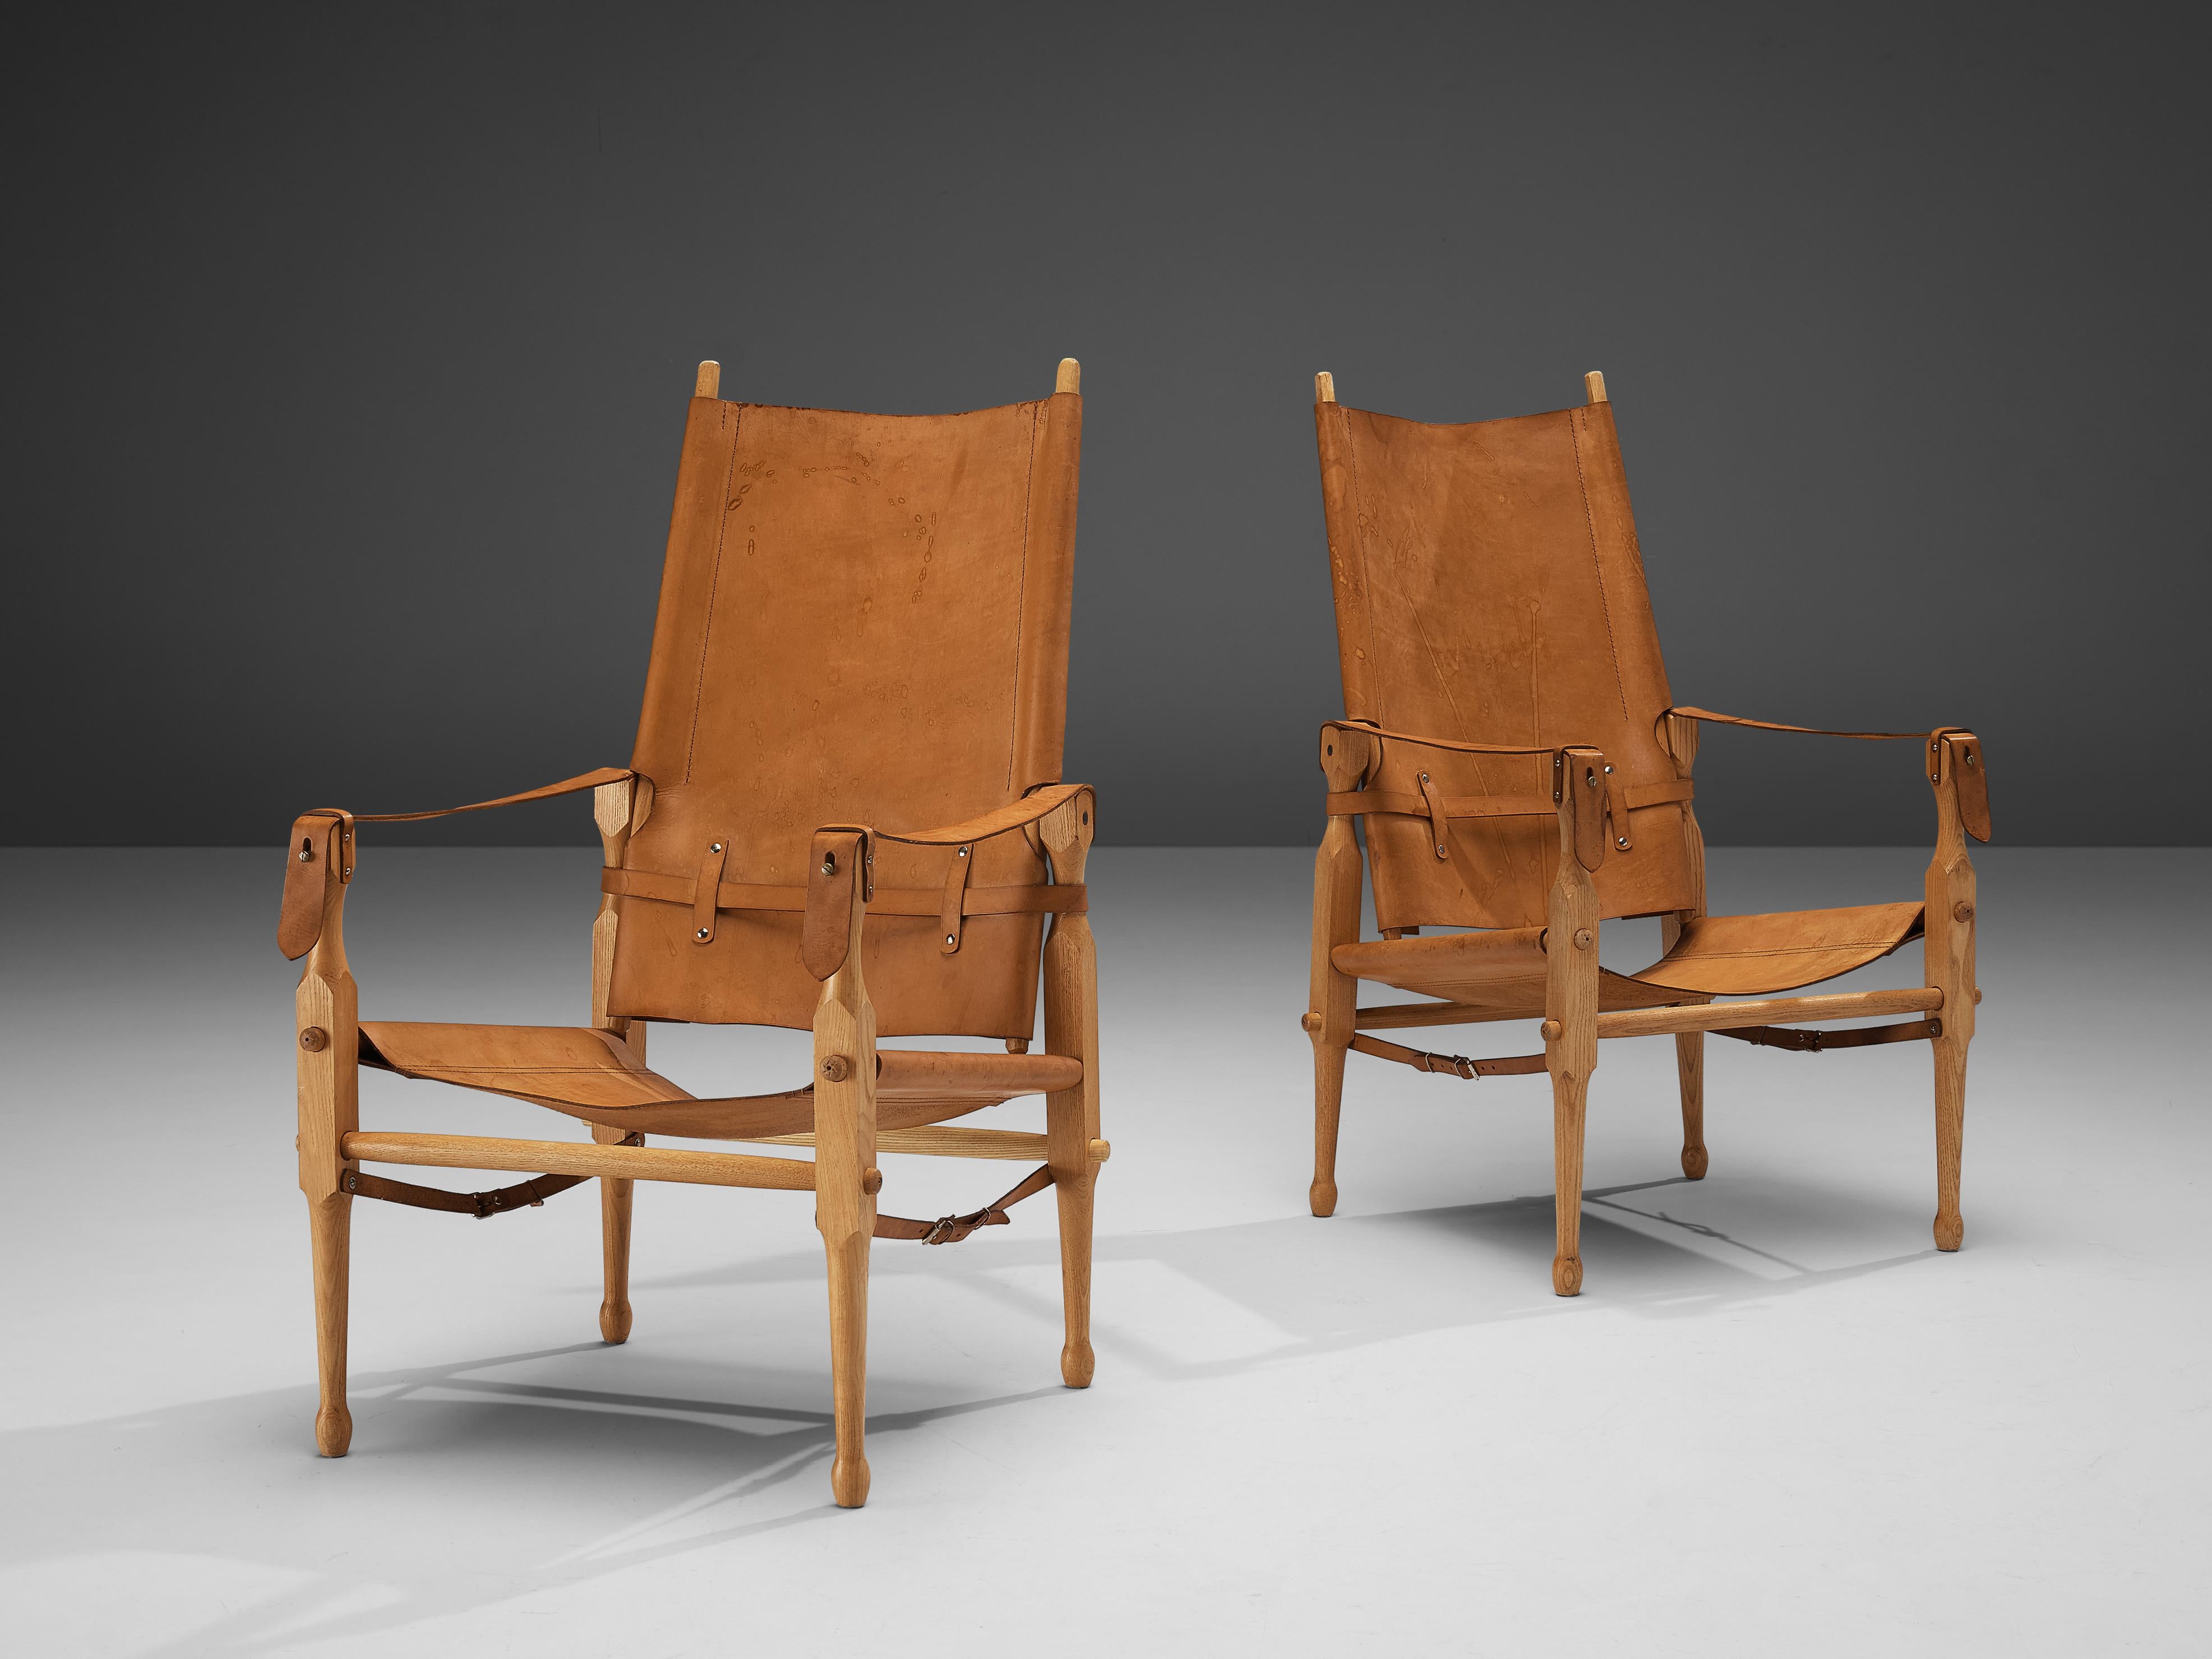 Lounge chairs, leather, beech, brass, Denmark, 1960s 

These Danish 'Safari' armchairs show very elegant and well-designed lines, in combination with carefully crafted wood joints. The patinated cognac leather with multiple straps completes this